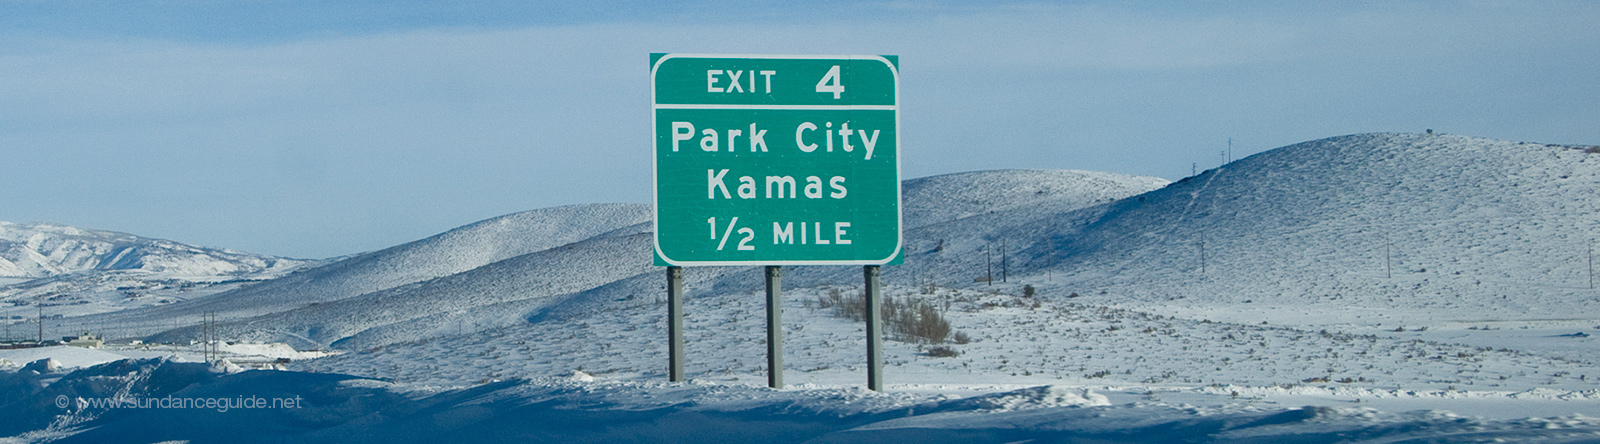 A picture of a freeway exit sign showing Park City